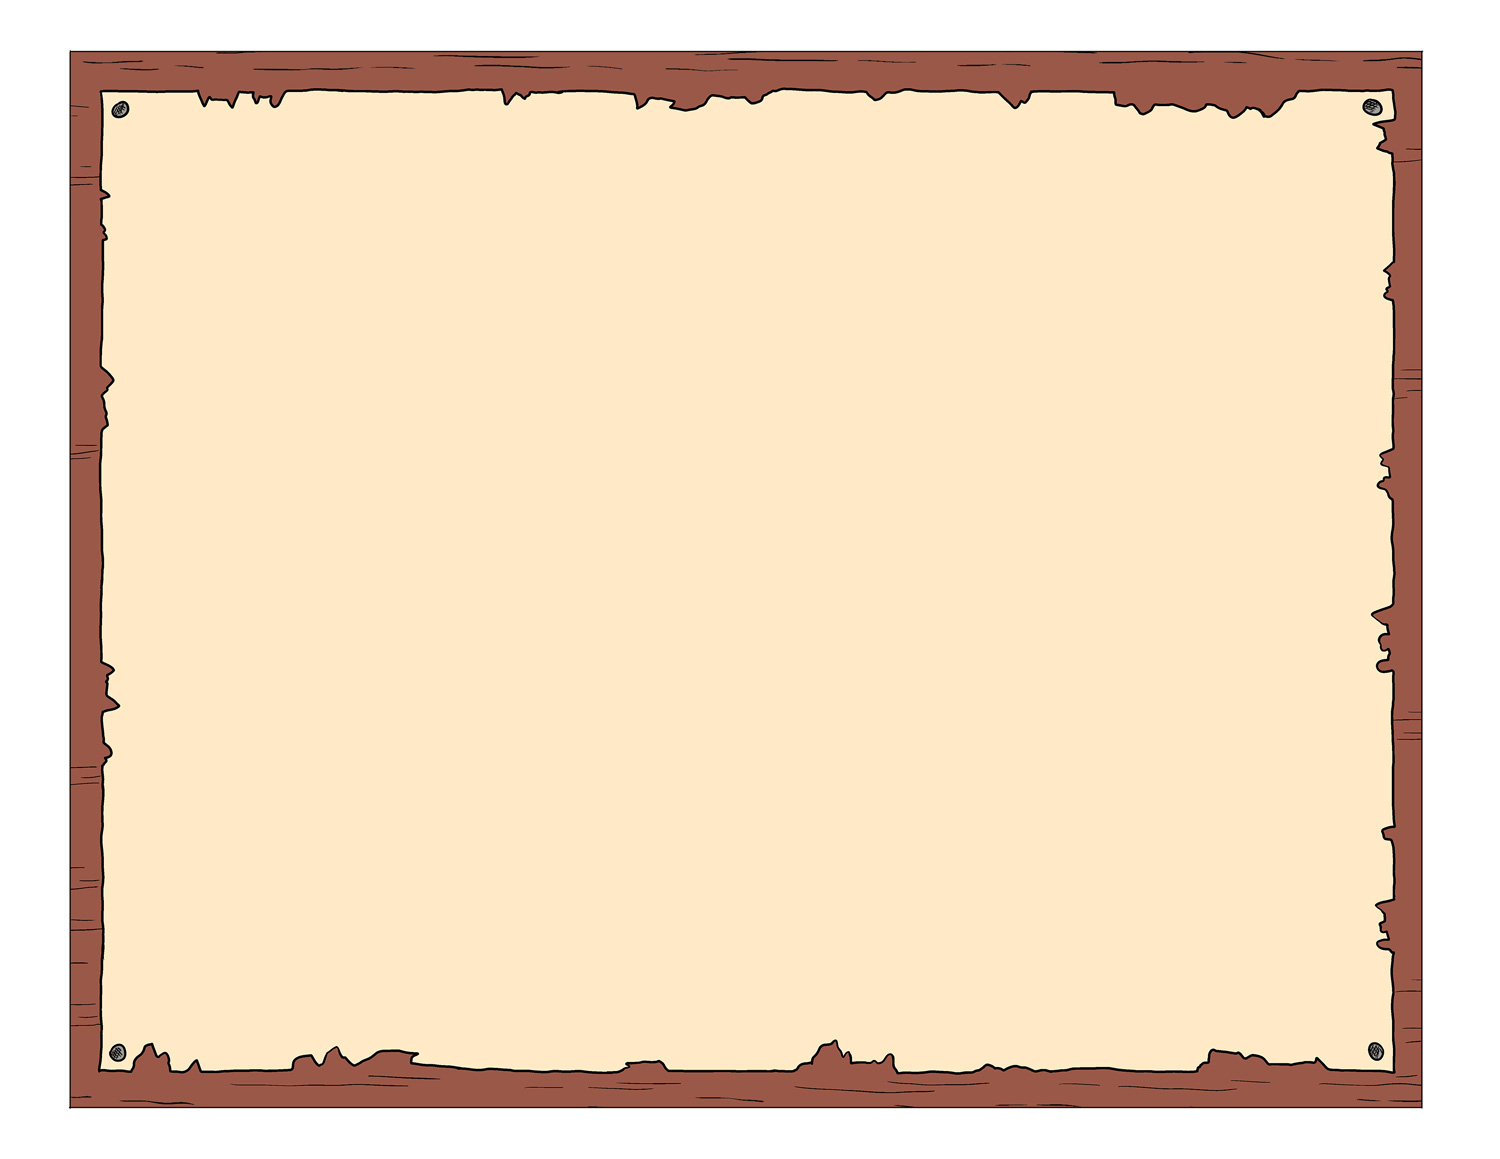 Pirate Map Border Template - ClipArt Best